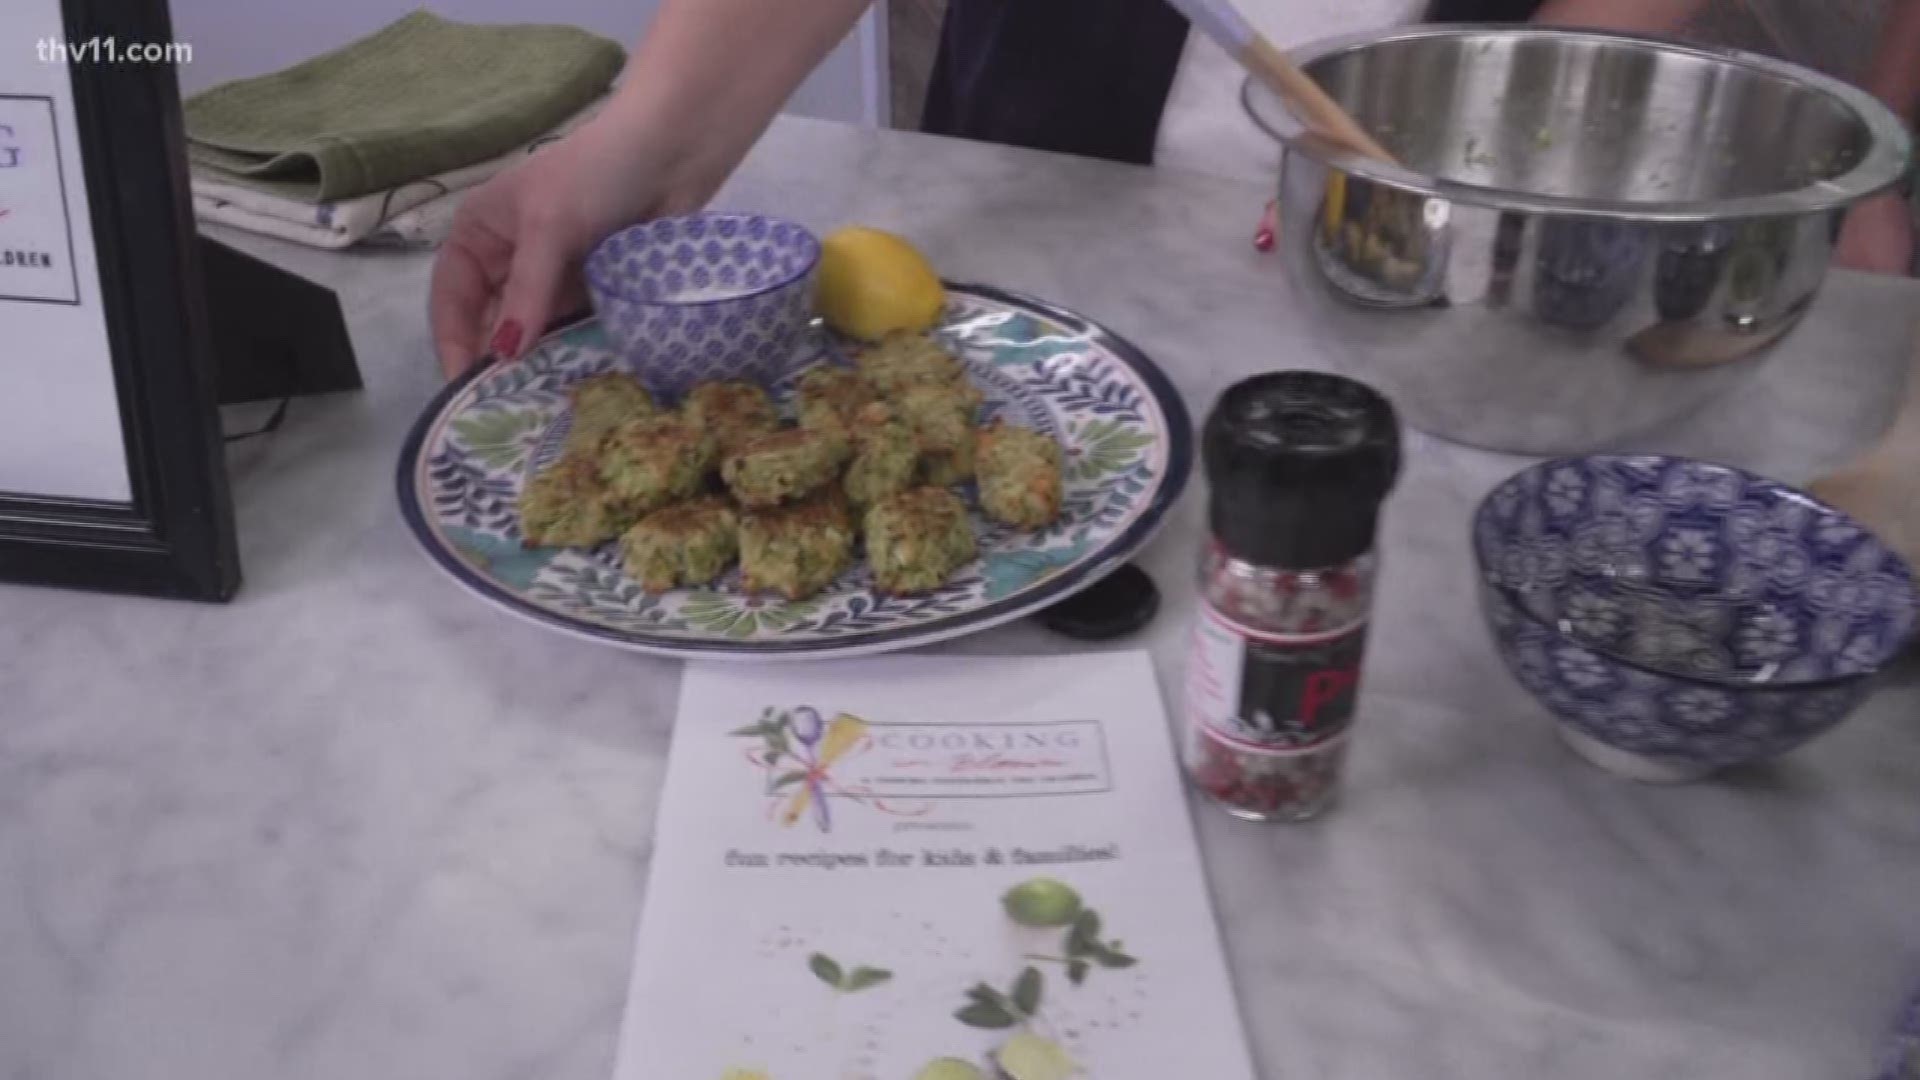 Denise Albert at Cooking in Bloom loves making easy recipes that you can whip up with your kids.
And this is a yummy way to get them to eat their veggies.